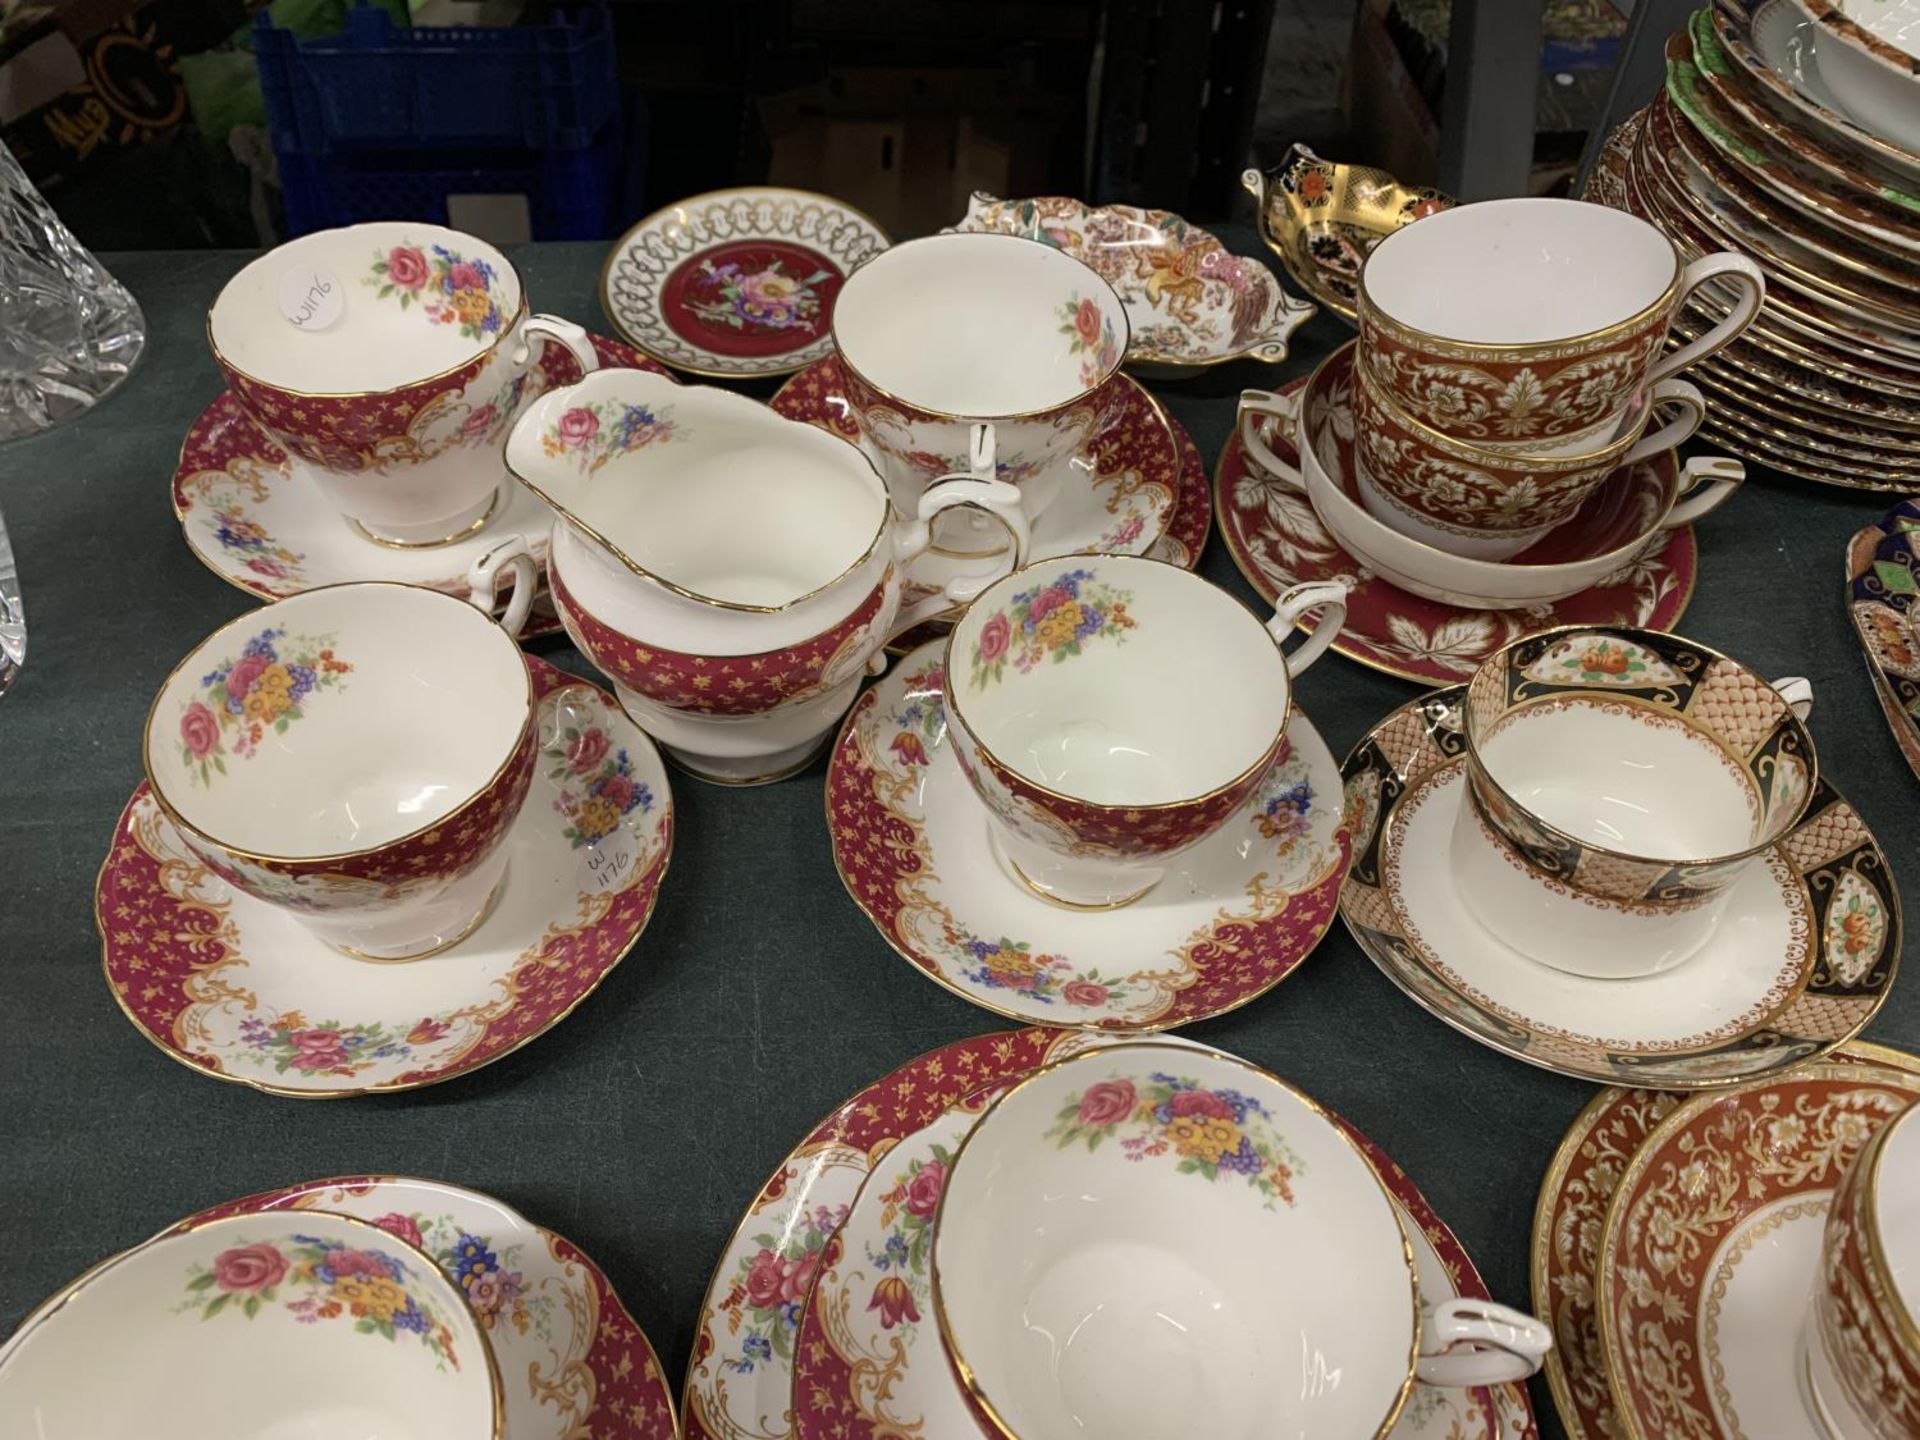 A QUANTITY OF CHINA CUPS, SAUCERS, PLATES, ETC TO INCLUDE PARAGON 'ROCKINGHAM', SPODE, ROYAL - Image 2 of 6